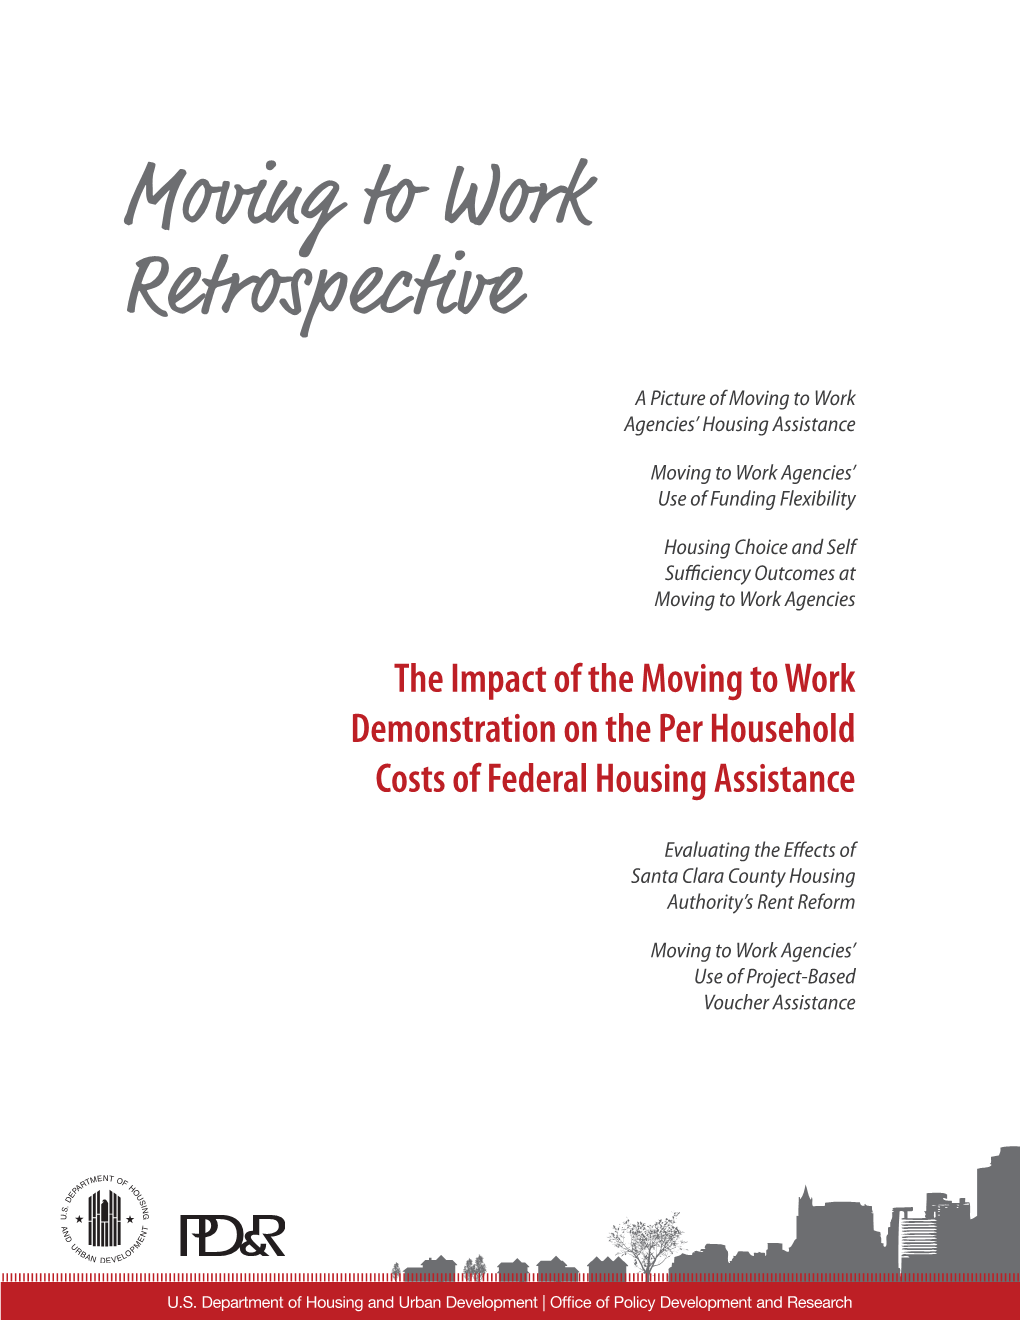 Impact of MTW on the Per Household Costs of Federal Housing Assistance